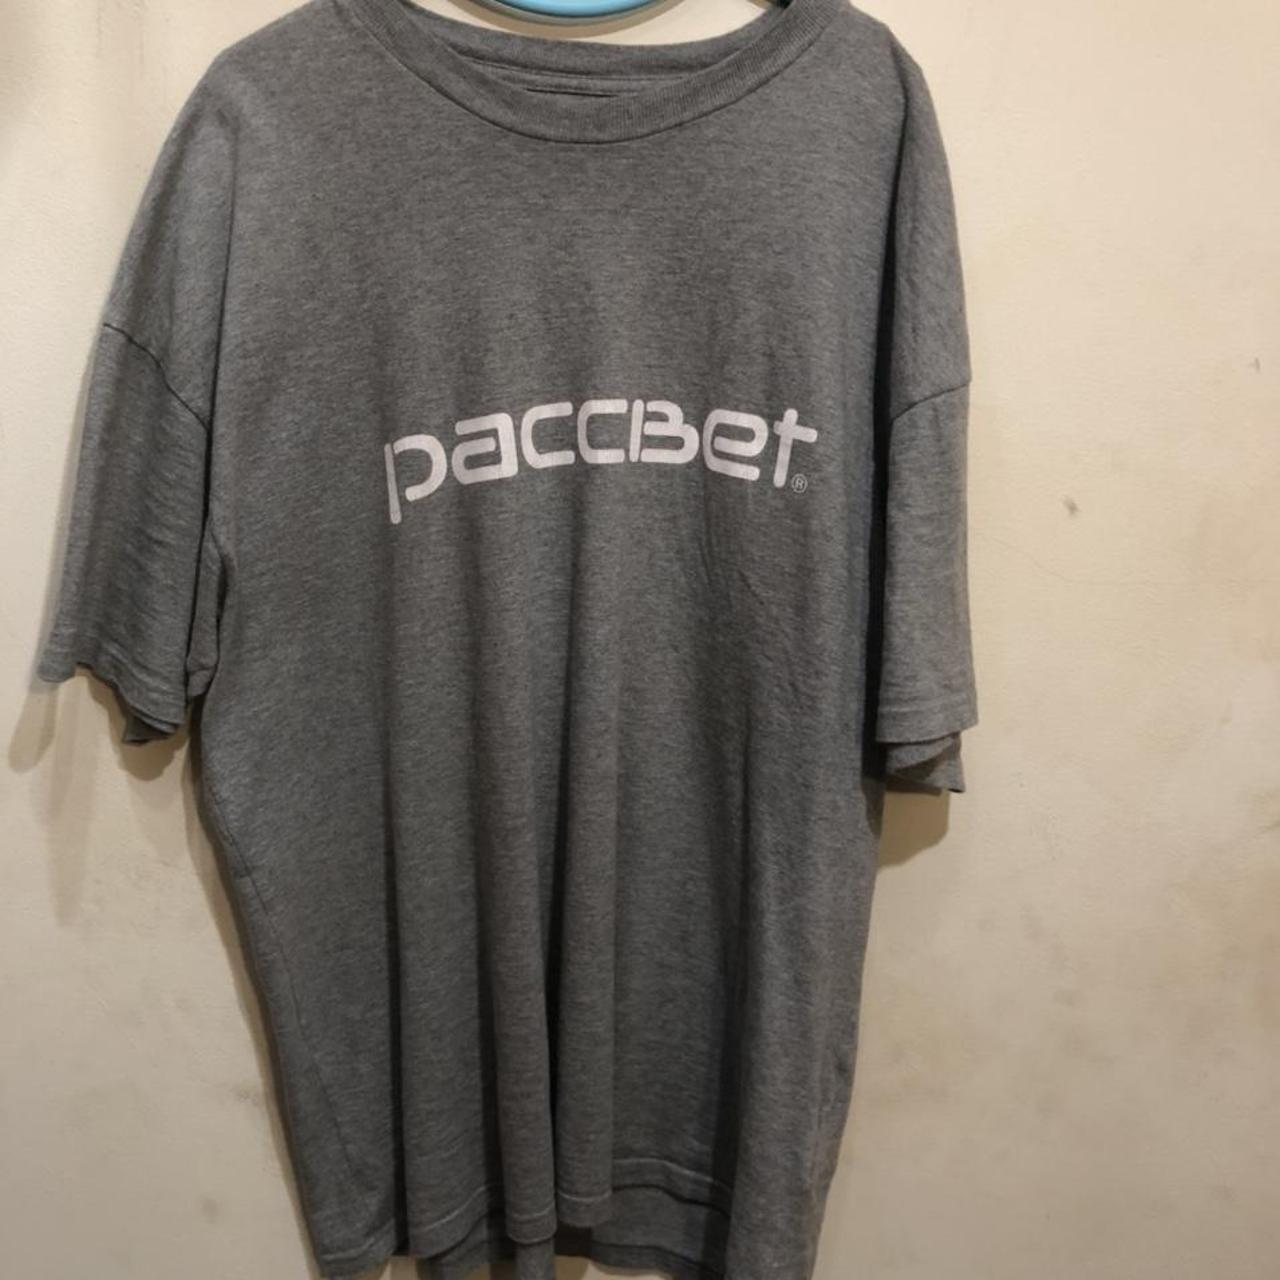 Product Image 1 - Grey paccbet t shirt 
Paccbet